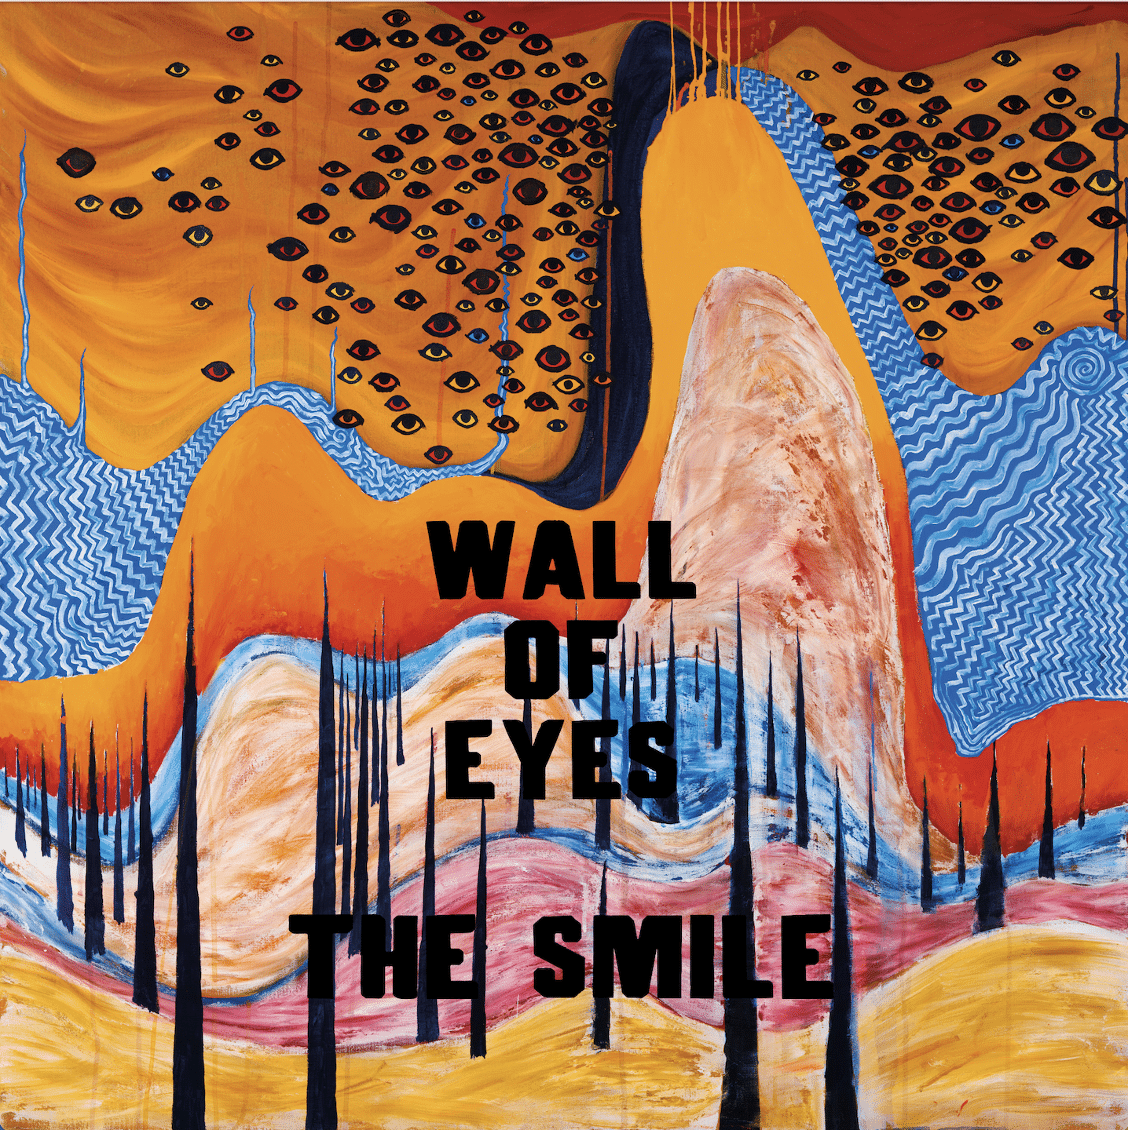 "Wall Of Eyes", do The Smile